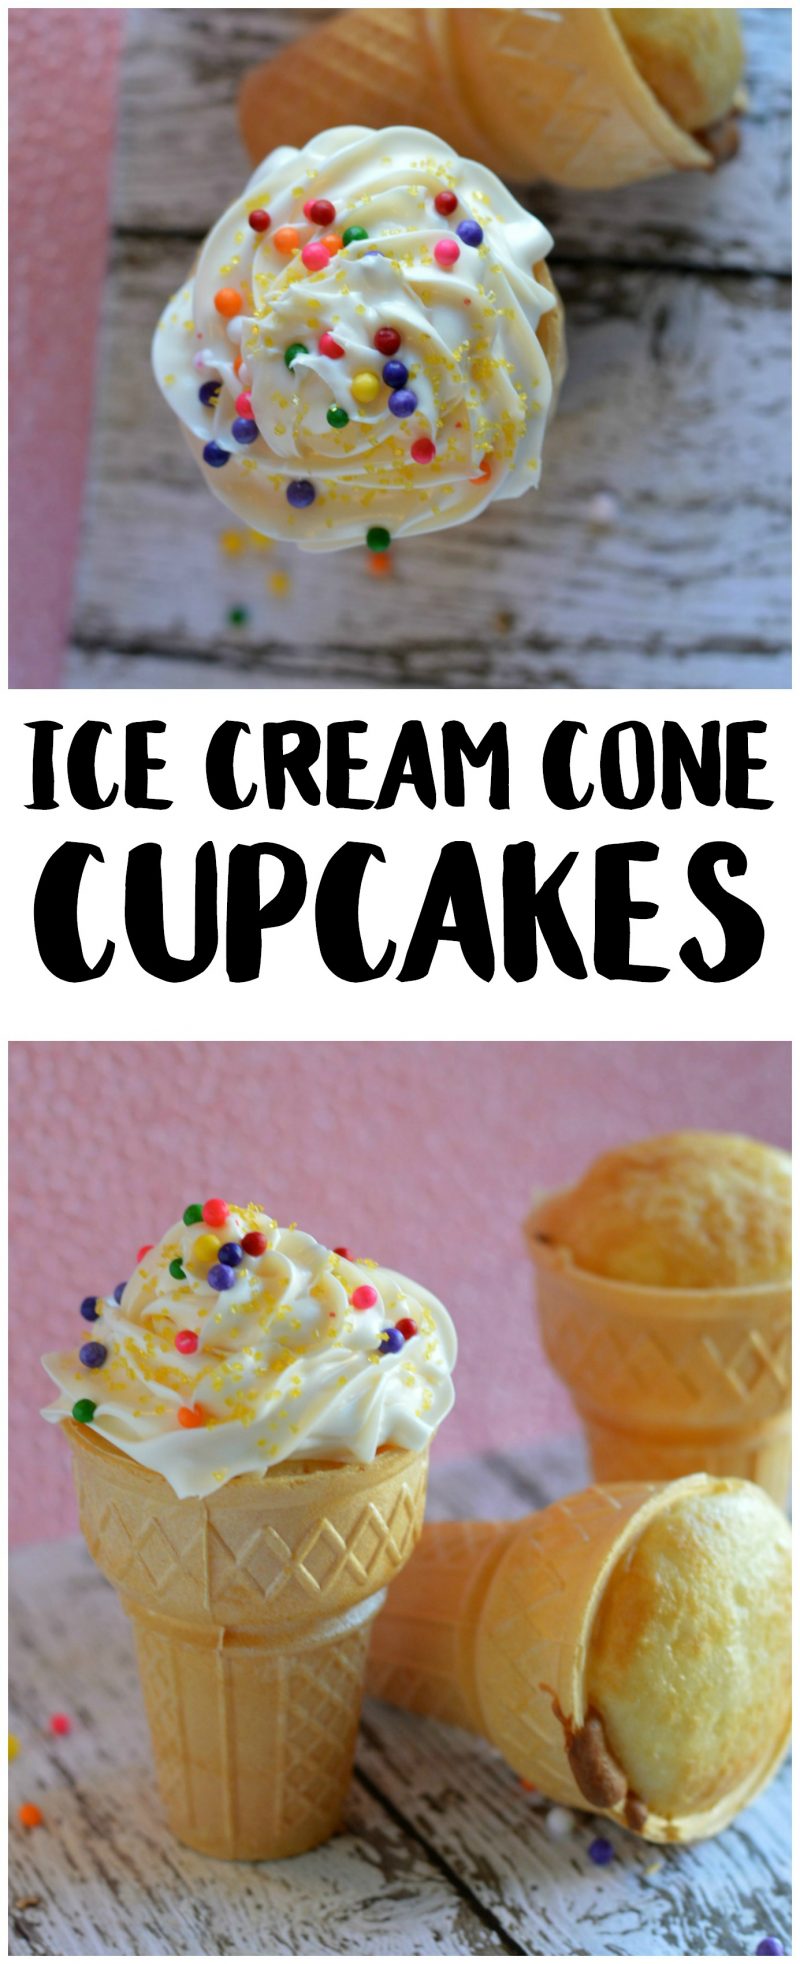 Whether they are vanilla or chocolate or something more creative, homemade cupcakes are so delicious and easy. But they can get messy too, especially at kid parties! These cute Ice Cream Cone Cupcakes are baked right in the cone so they have their own holder, eliminating the mess! Learn how to make these creative birthday cupcakes with this easy recipe- and get creative with your decoration ideas!